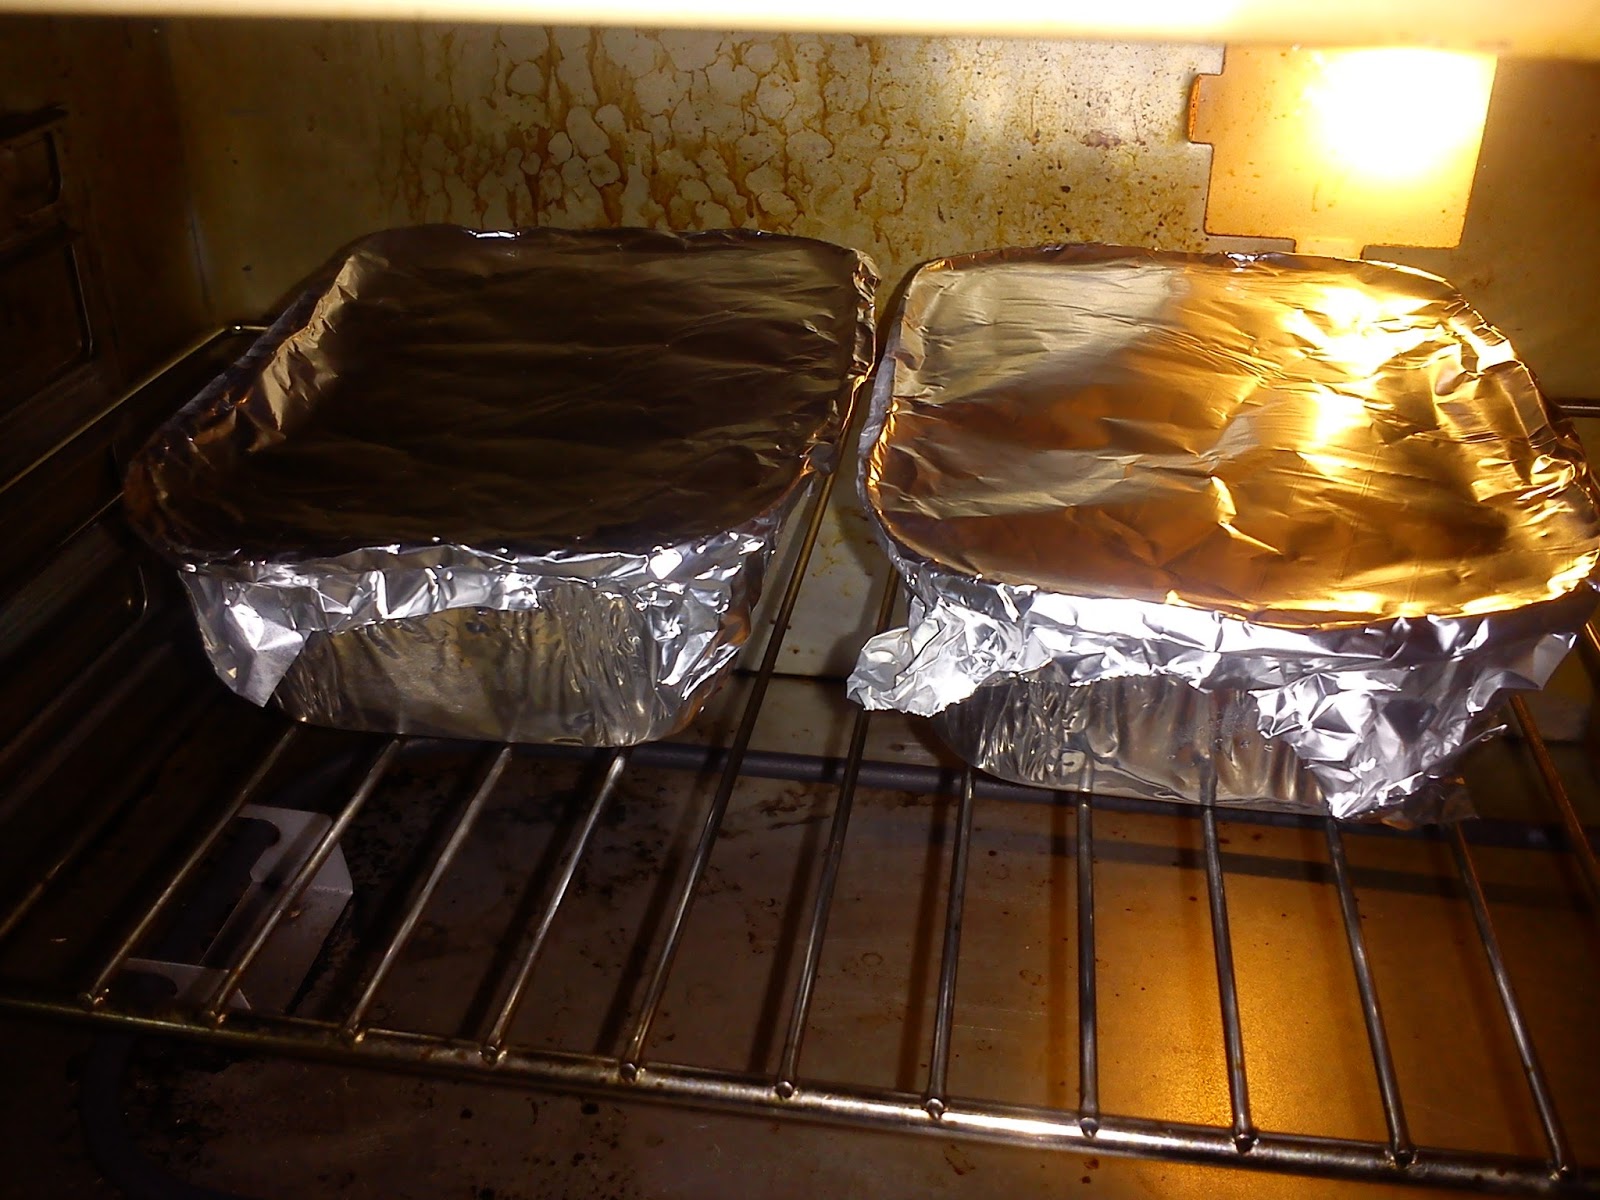 Will this weekend a baking journey?Take your chicken and disposable foil  container in the oven.Yummy